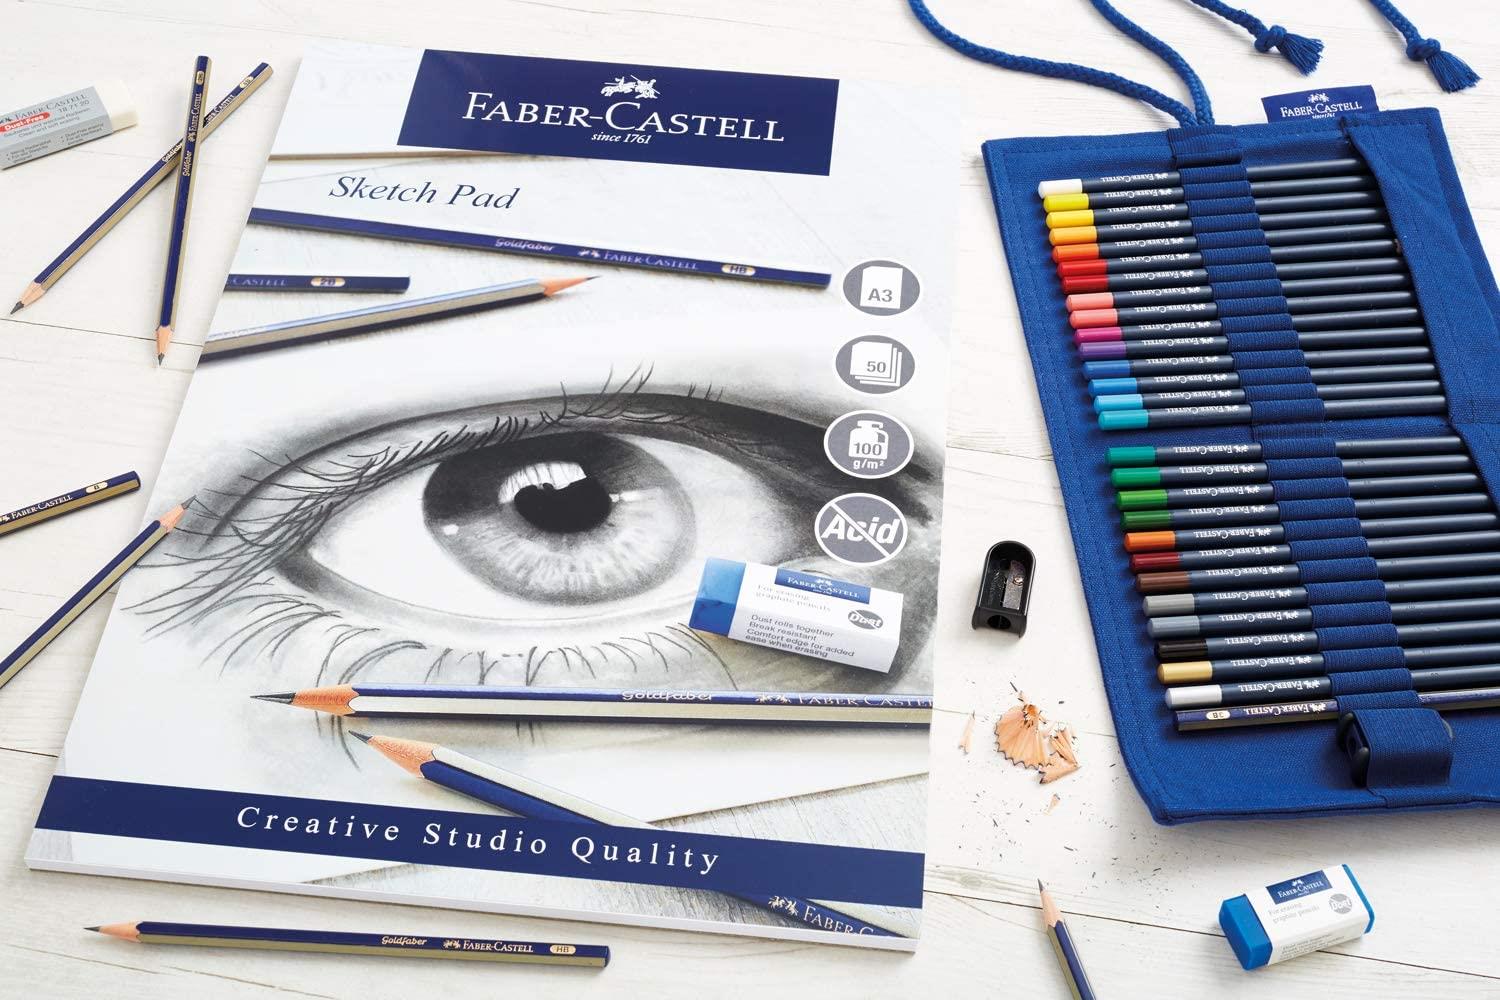 Faber-Castell Sketch Pad A4 100 g